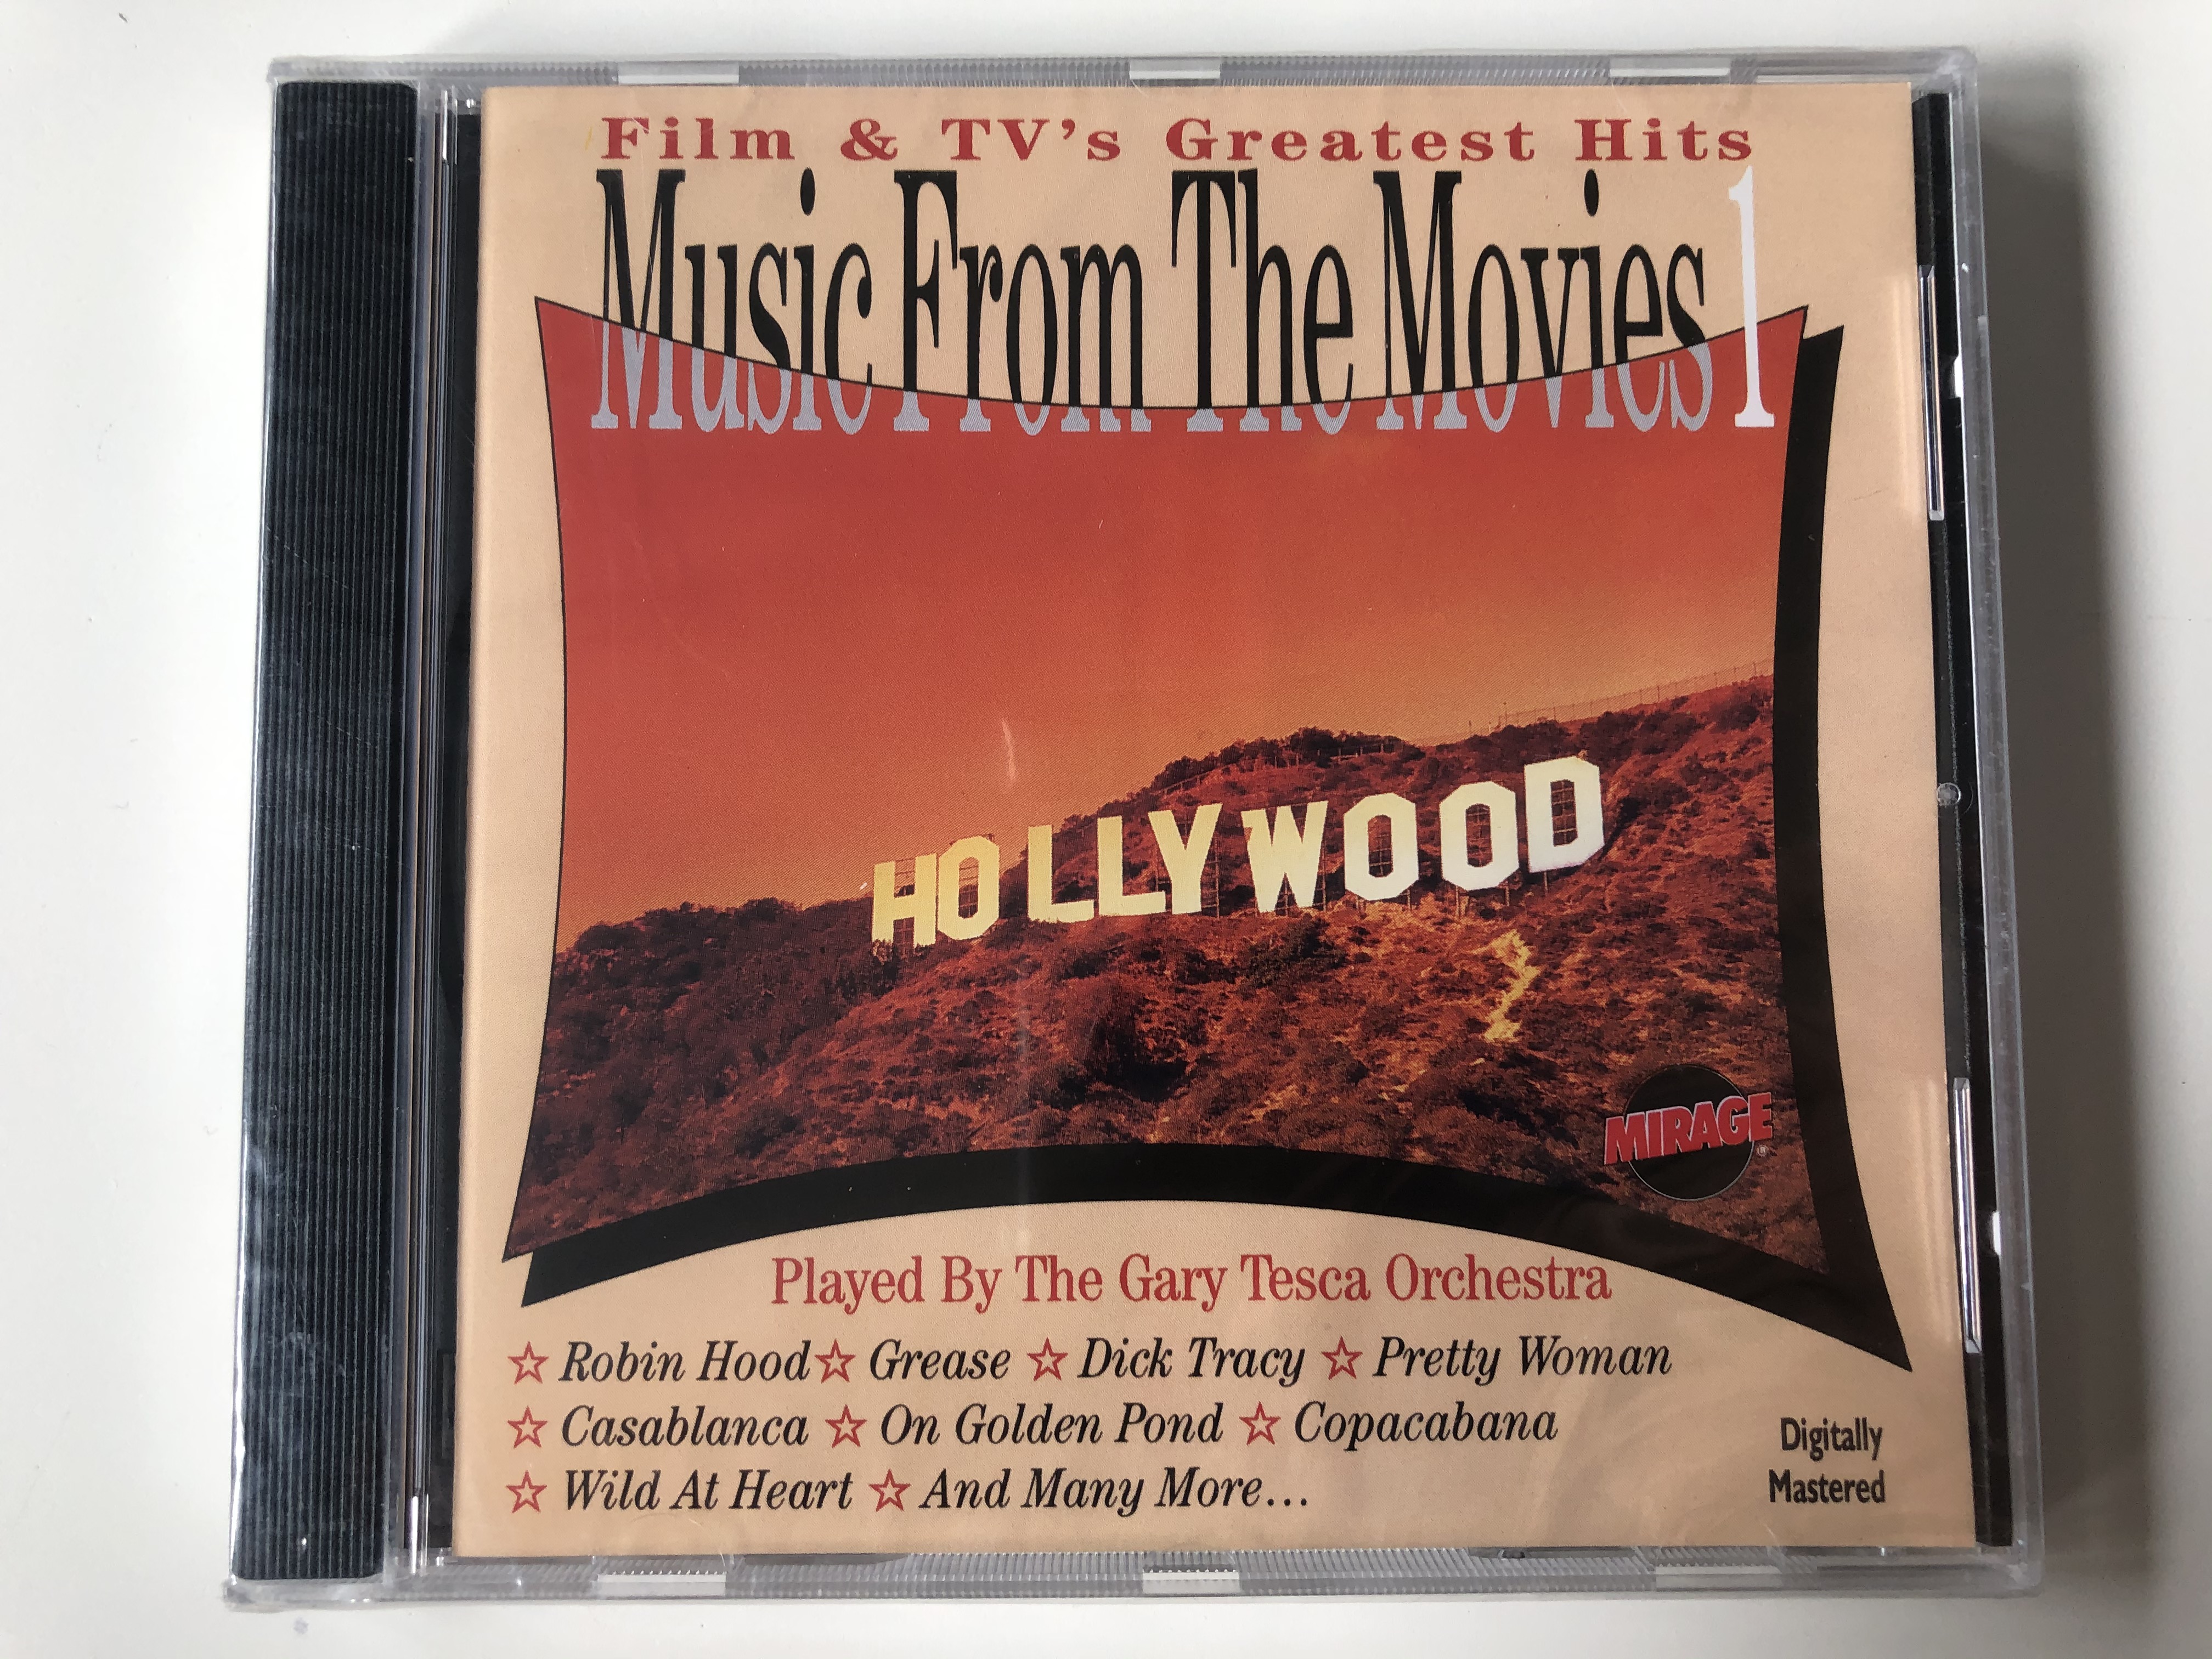 film-tv-s-greatest-hits-music-from-the-movies-1-played-by-the-gary-tesca-orchestra-robin-hood-grease-dick-tracy-pretty-woman-casablanca-on-golden-pond-copacabana-wild-at-heart-...-m-1-.jpg